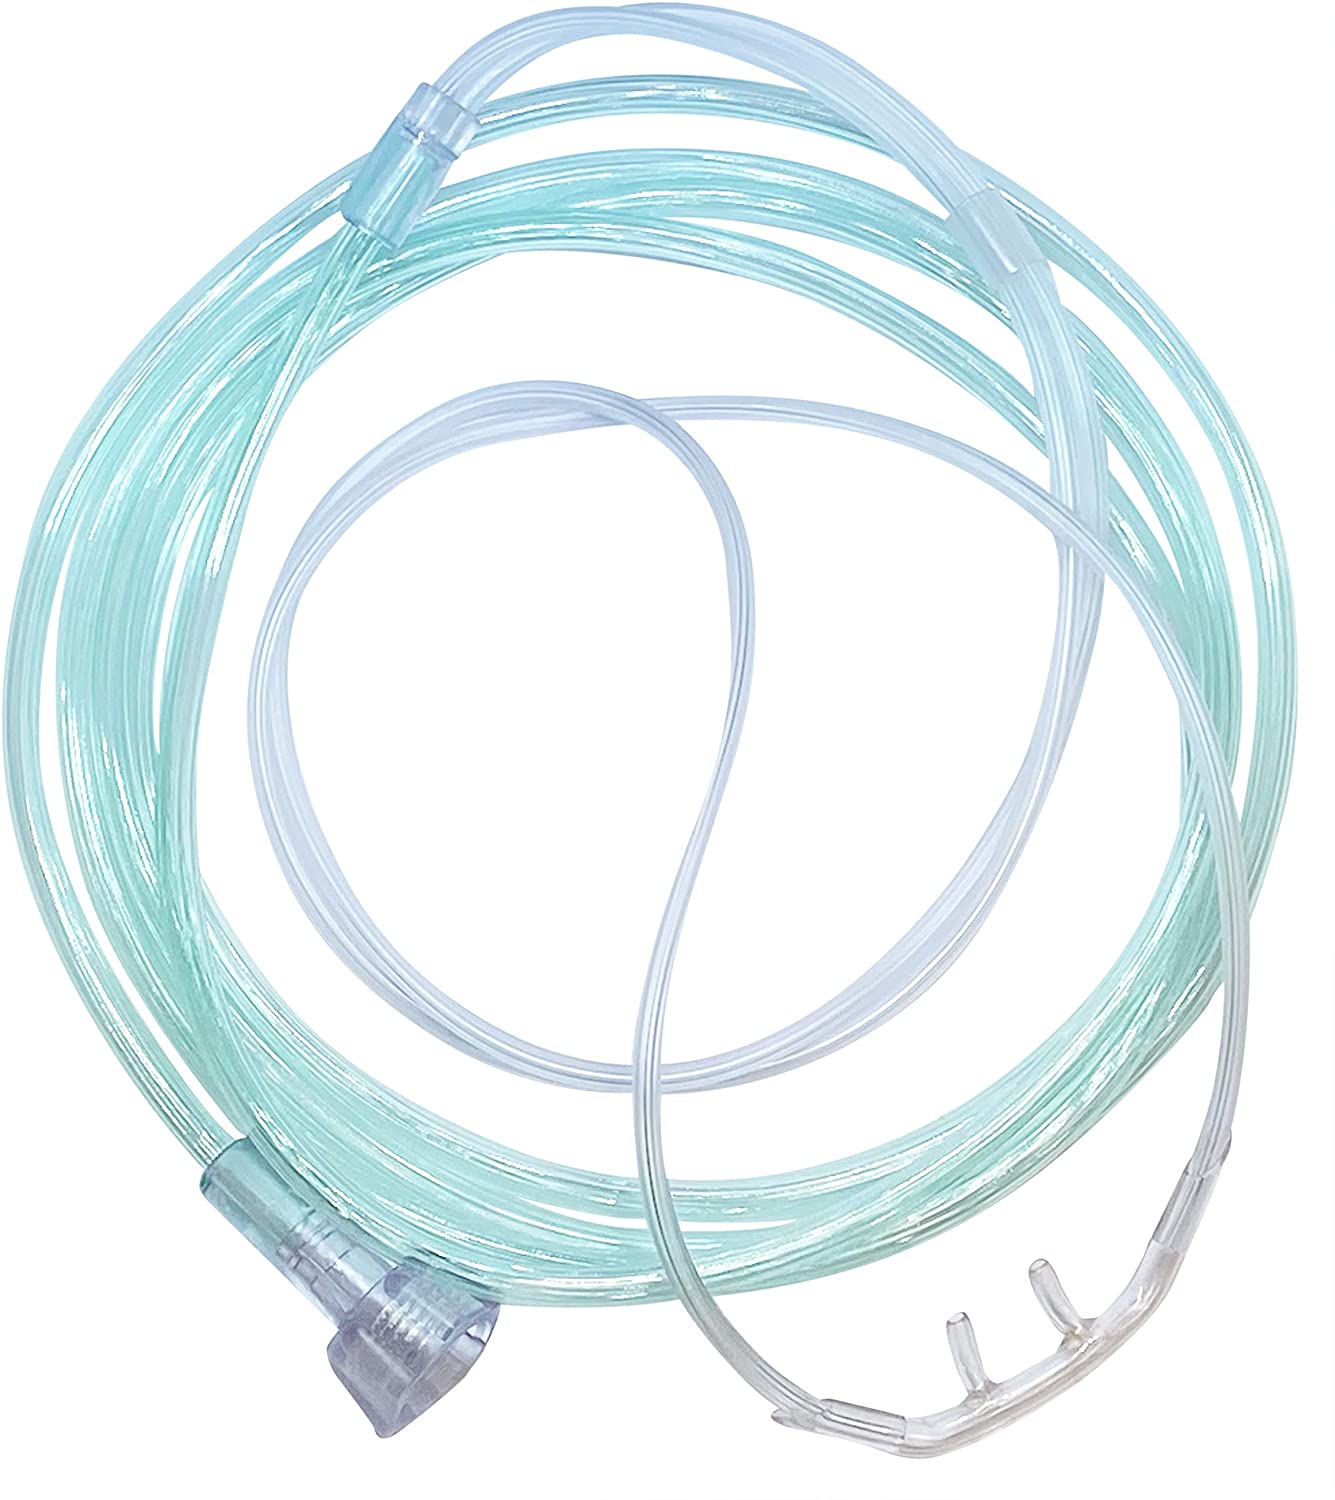 Westmed #0567 Adult Comfort Soft Plus Cannula with 7' Kink Resistant Tubing